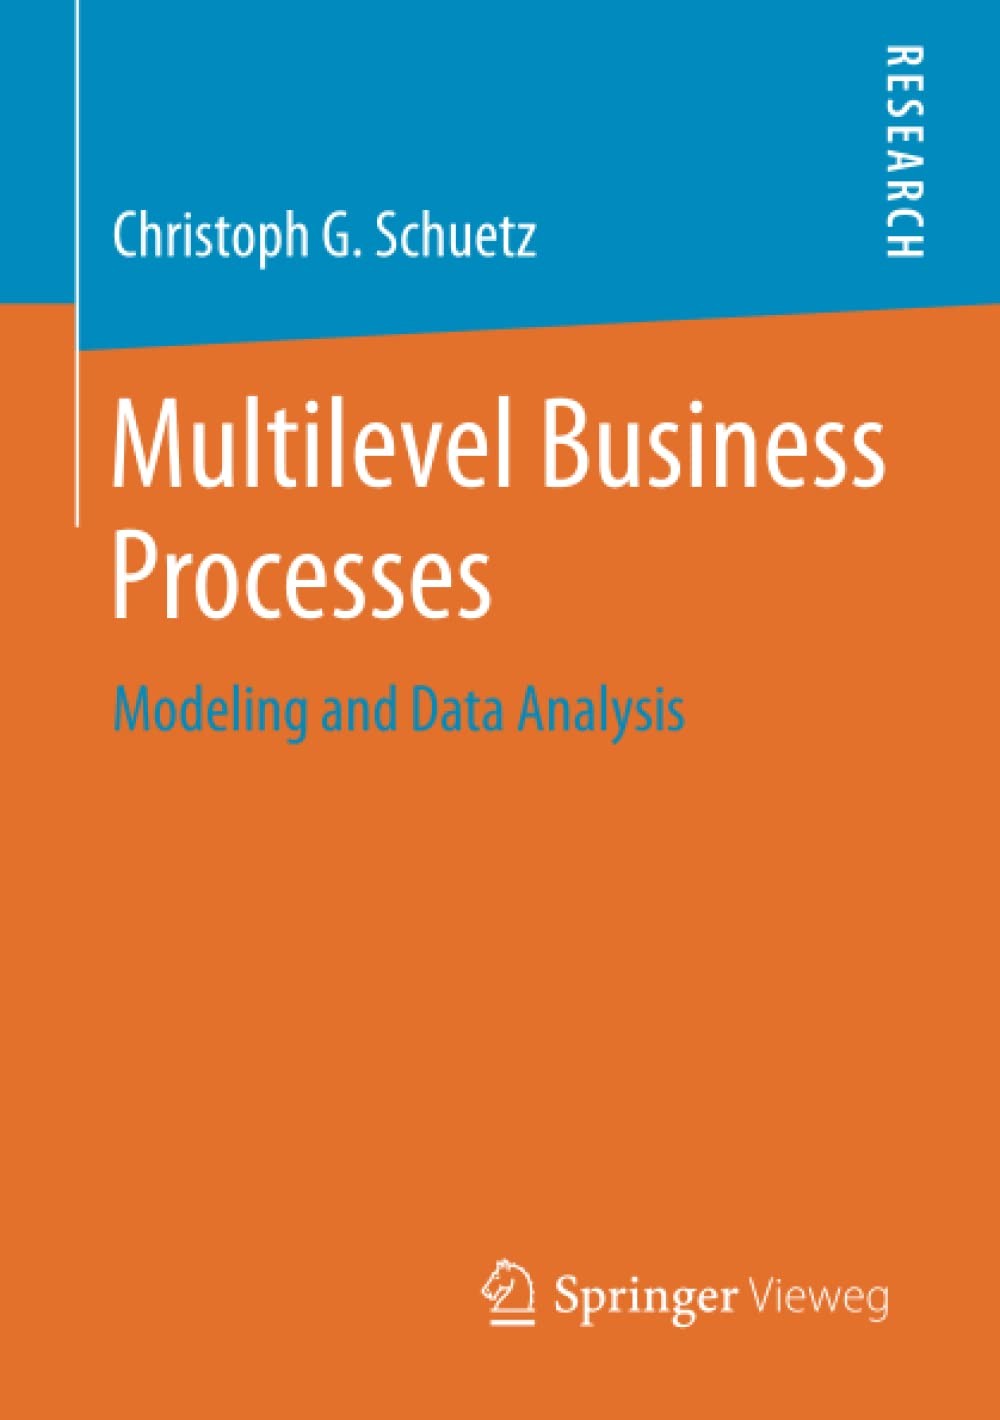 Multilevel Business Processes: Modeling and Data Analysis